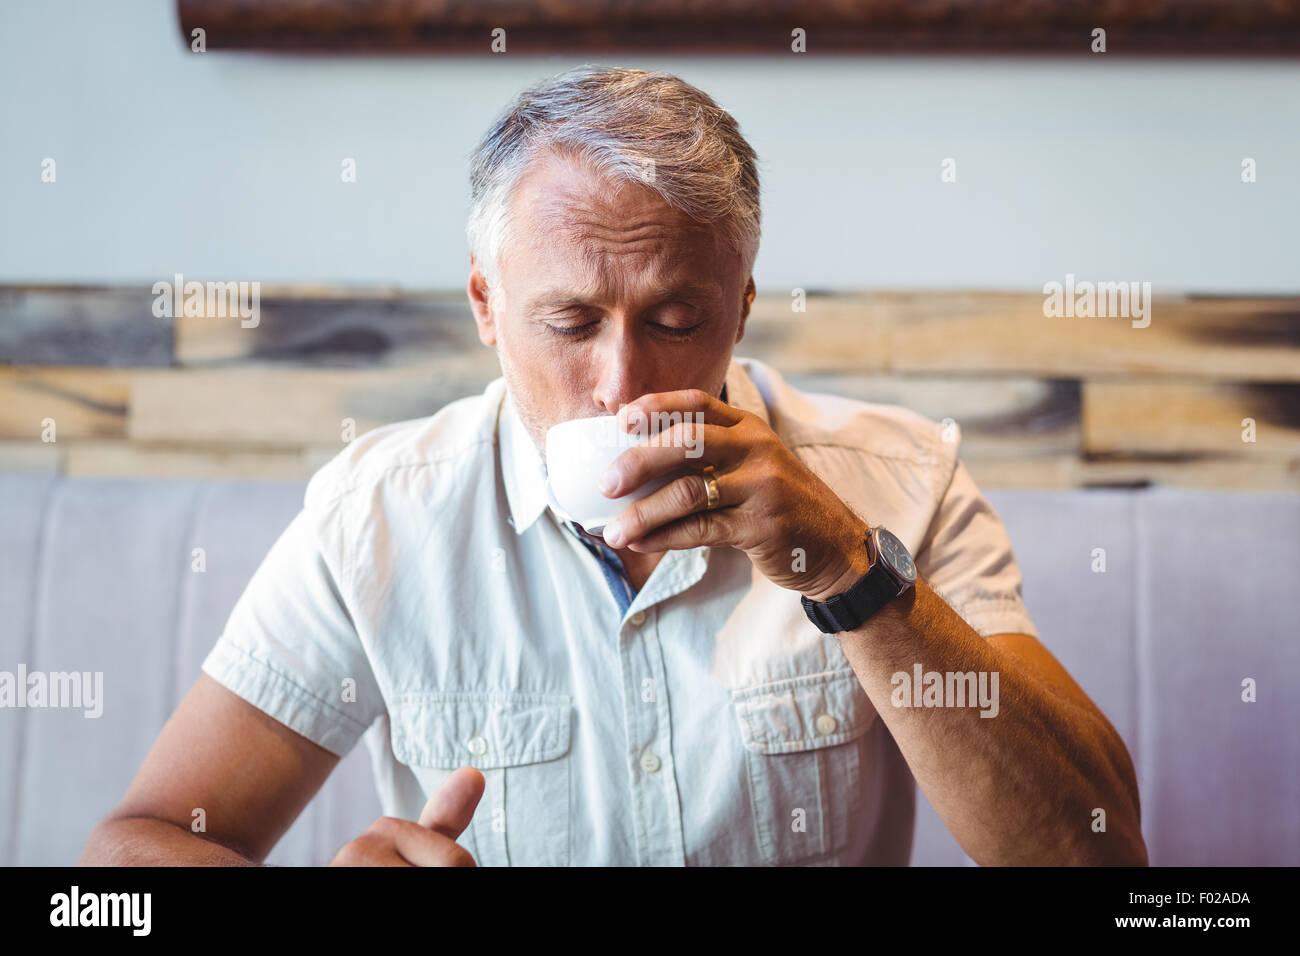 Casual man enjoying a cup of coffee Stock Photo